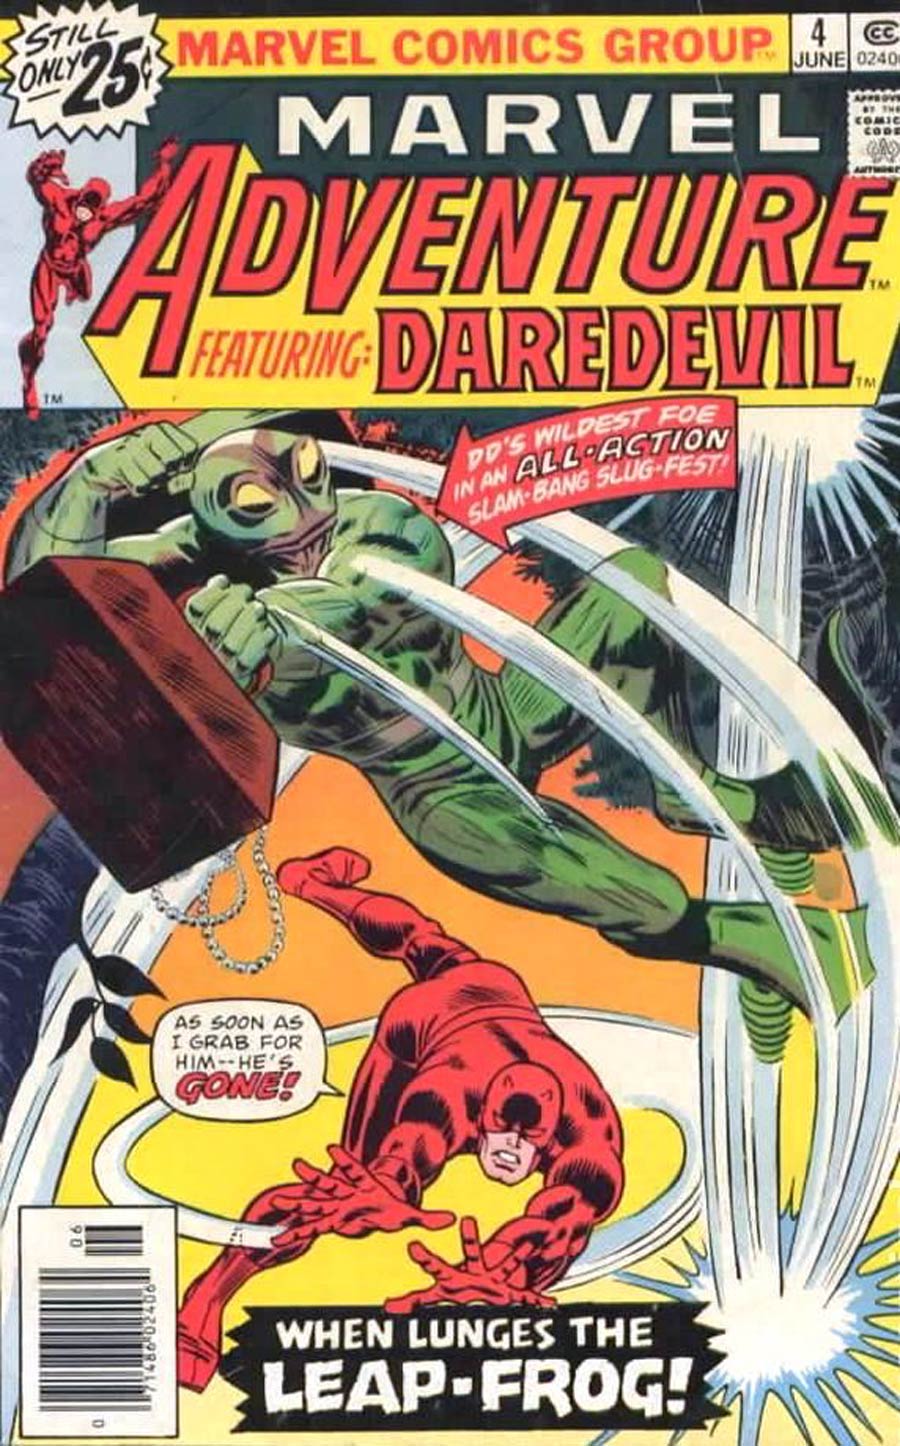 Marvel Adventure Featuring Daredevil #4 Cover A 25 Cent Regular Cover